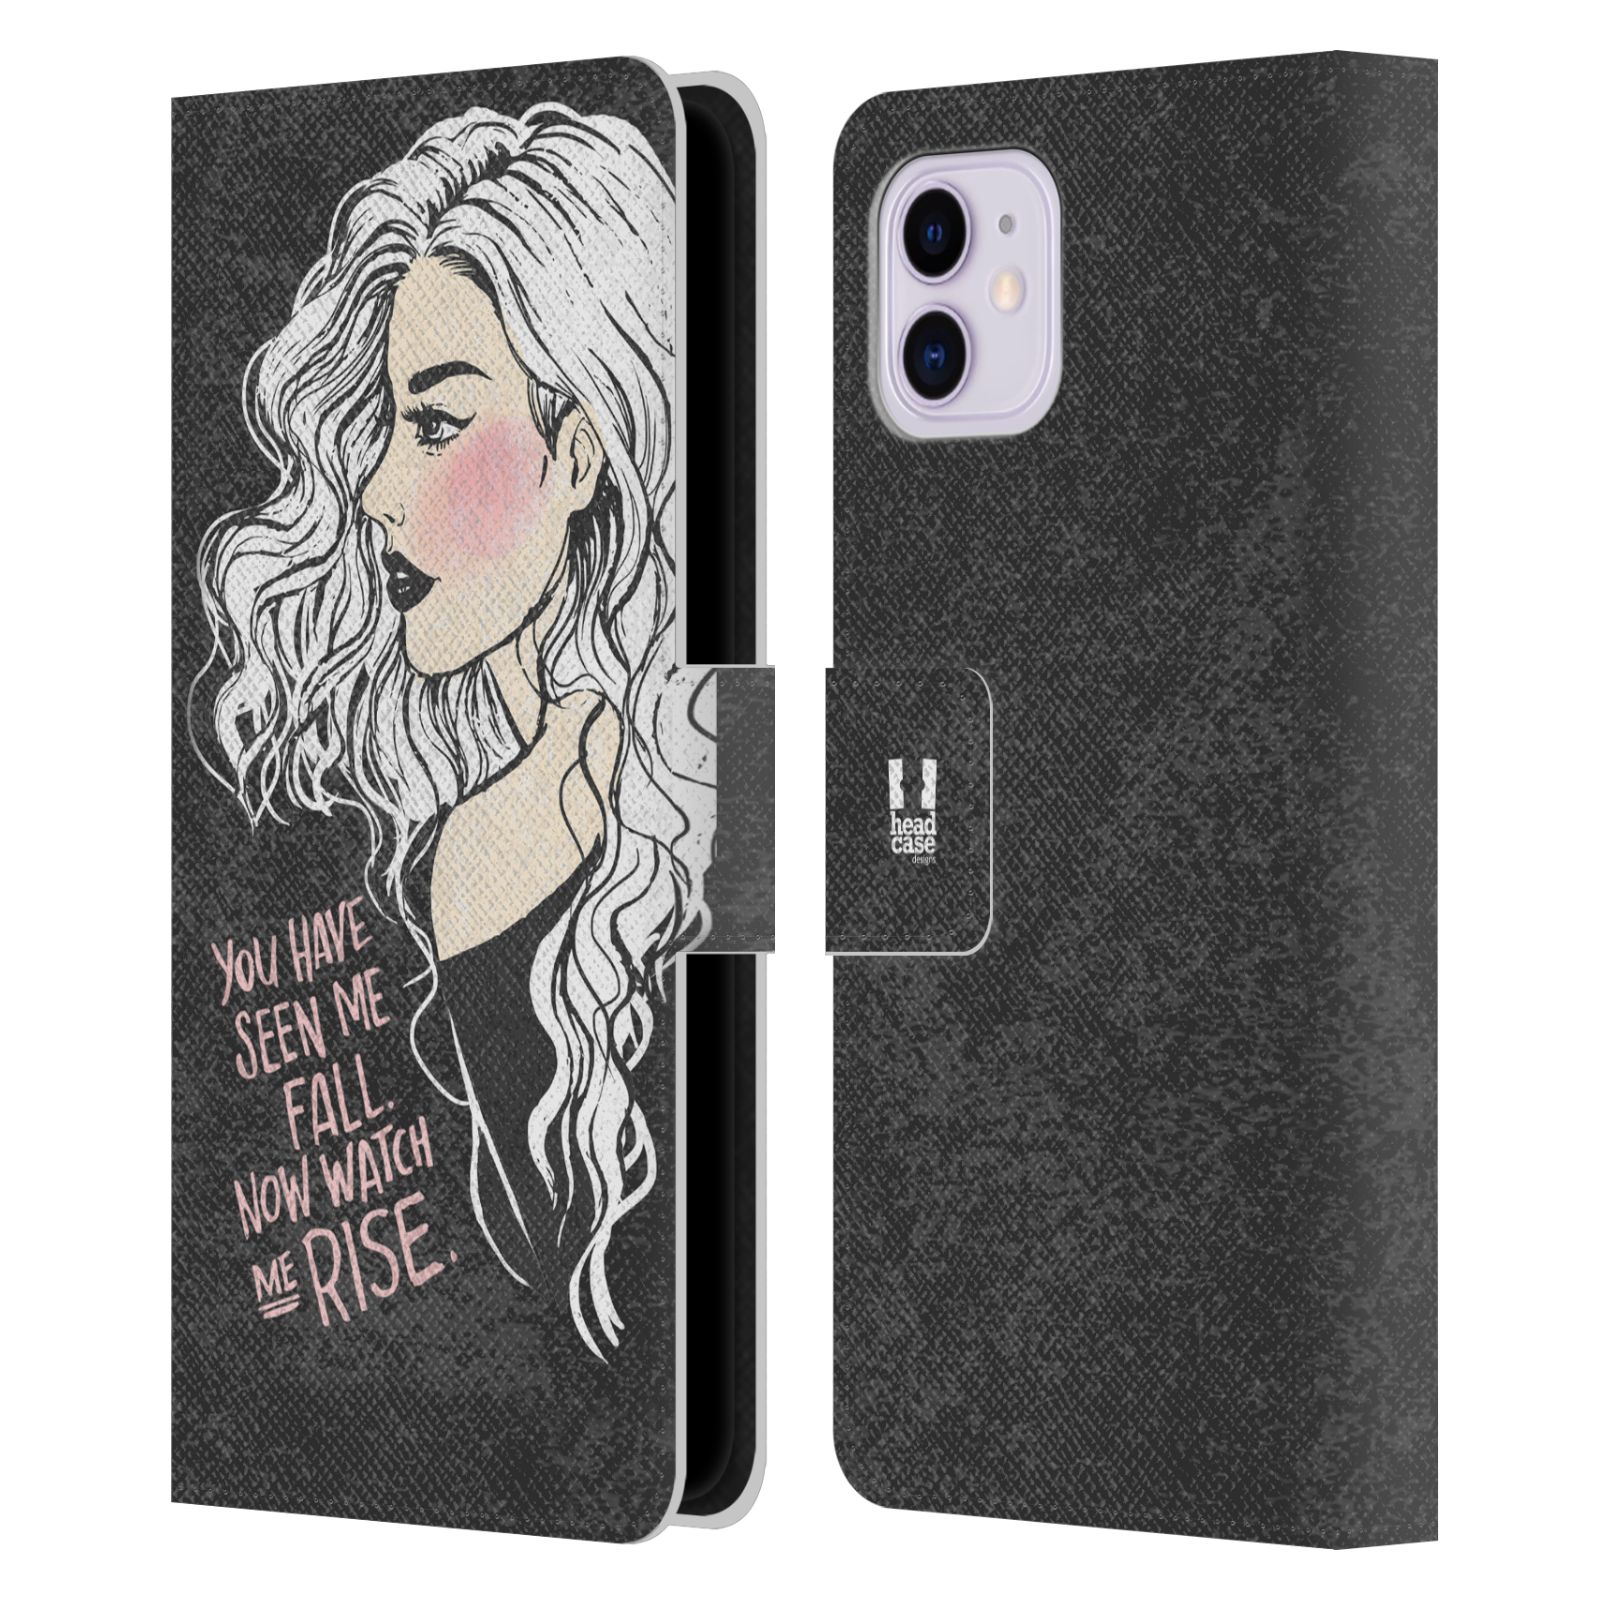 Pouzdro na mobil Apple Iphone 11 - HEAD CASE - Fall and Rise